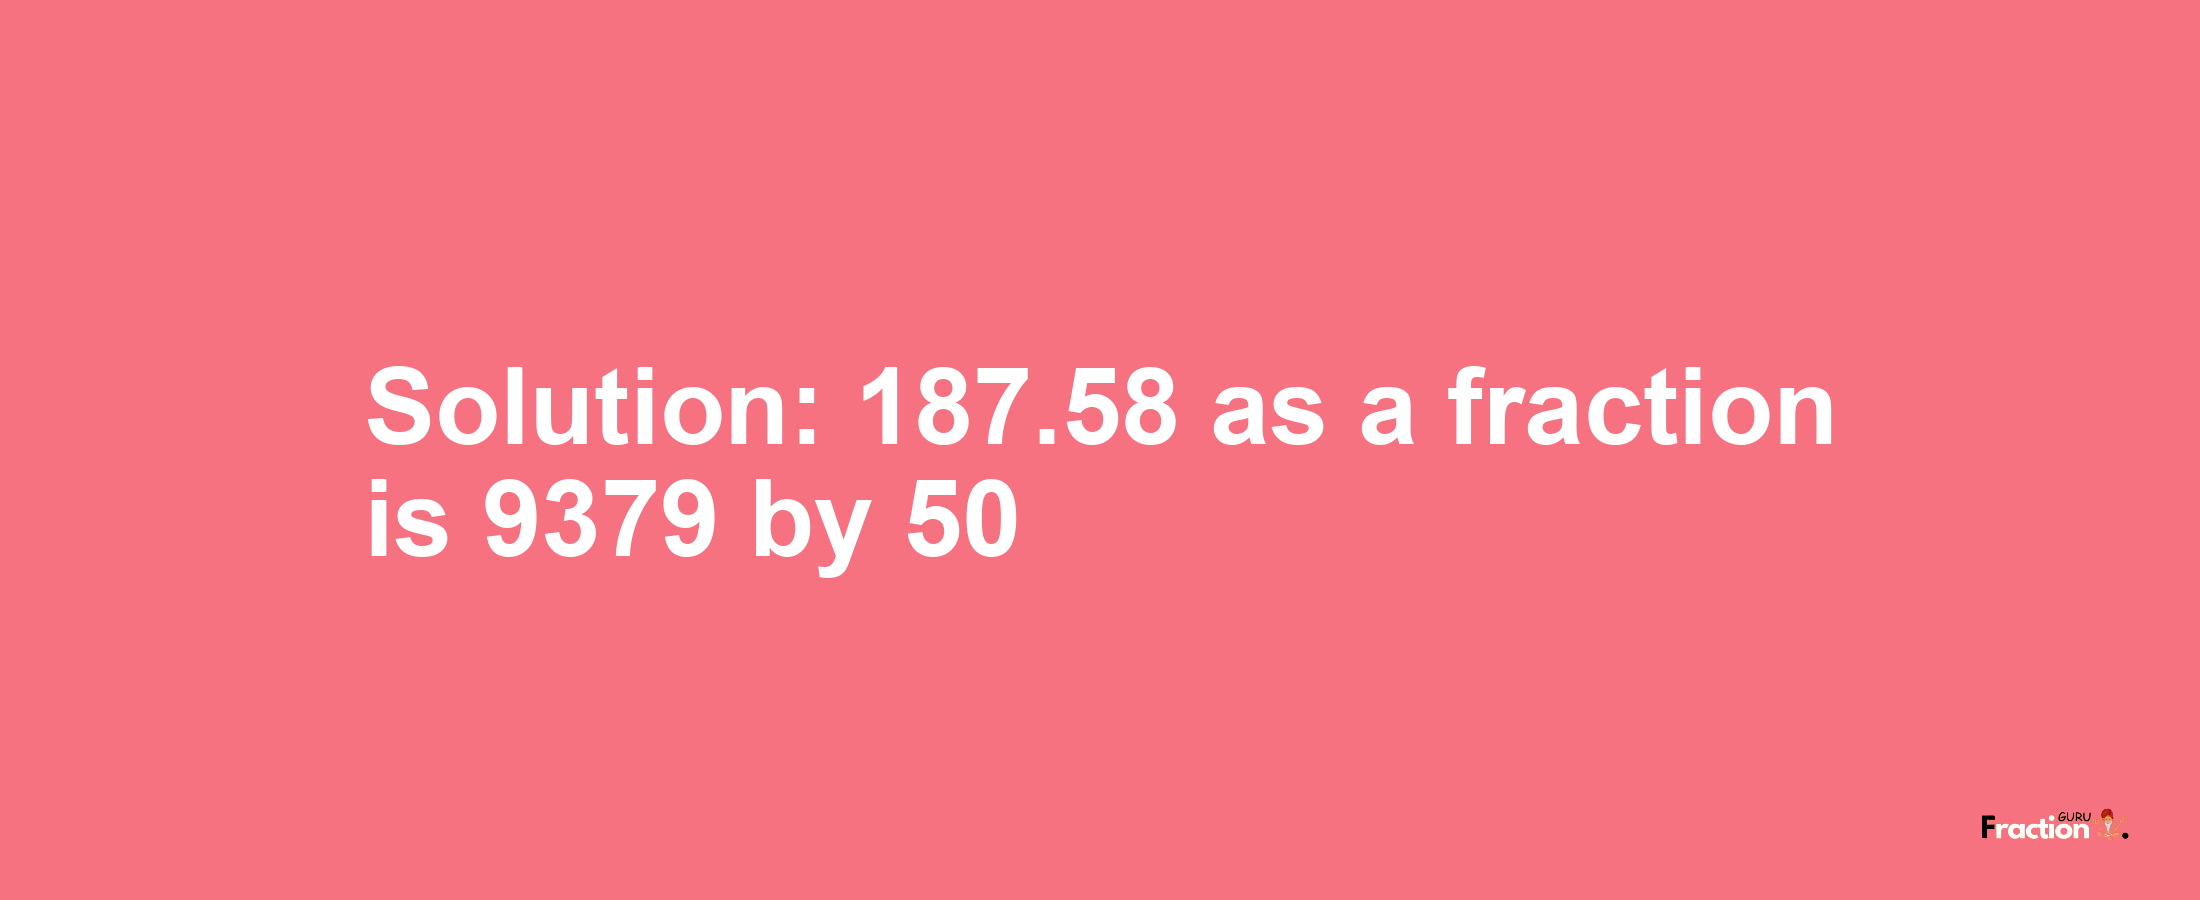 Solution:187.58 as a fraction is 9379/50